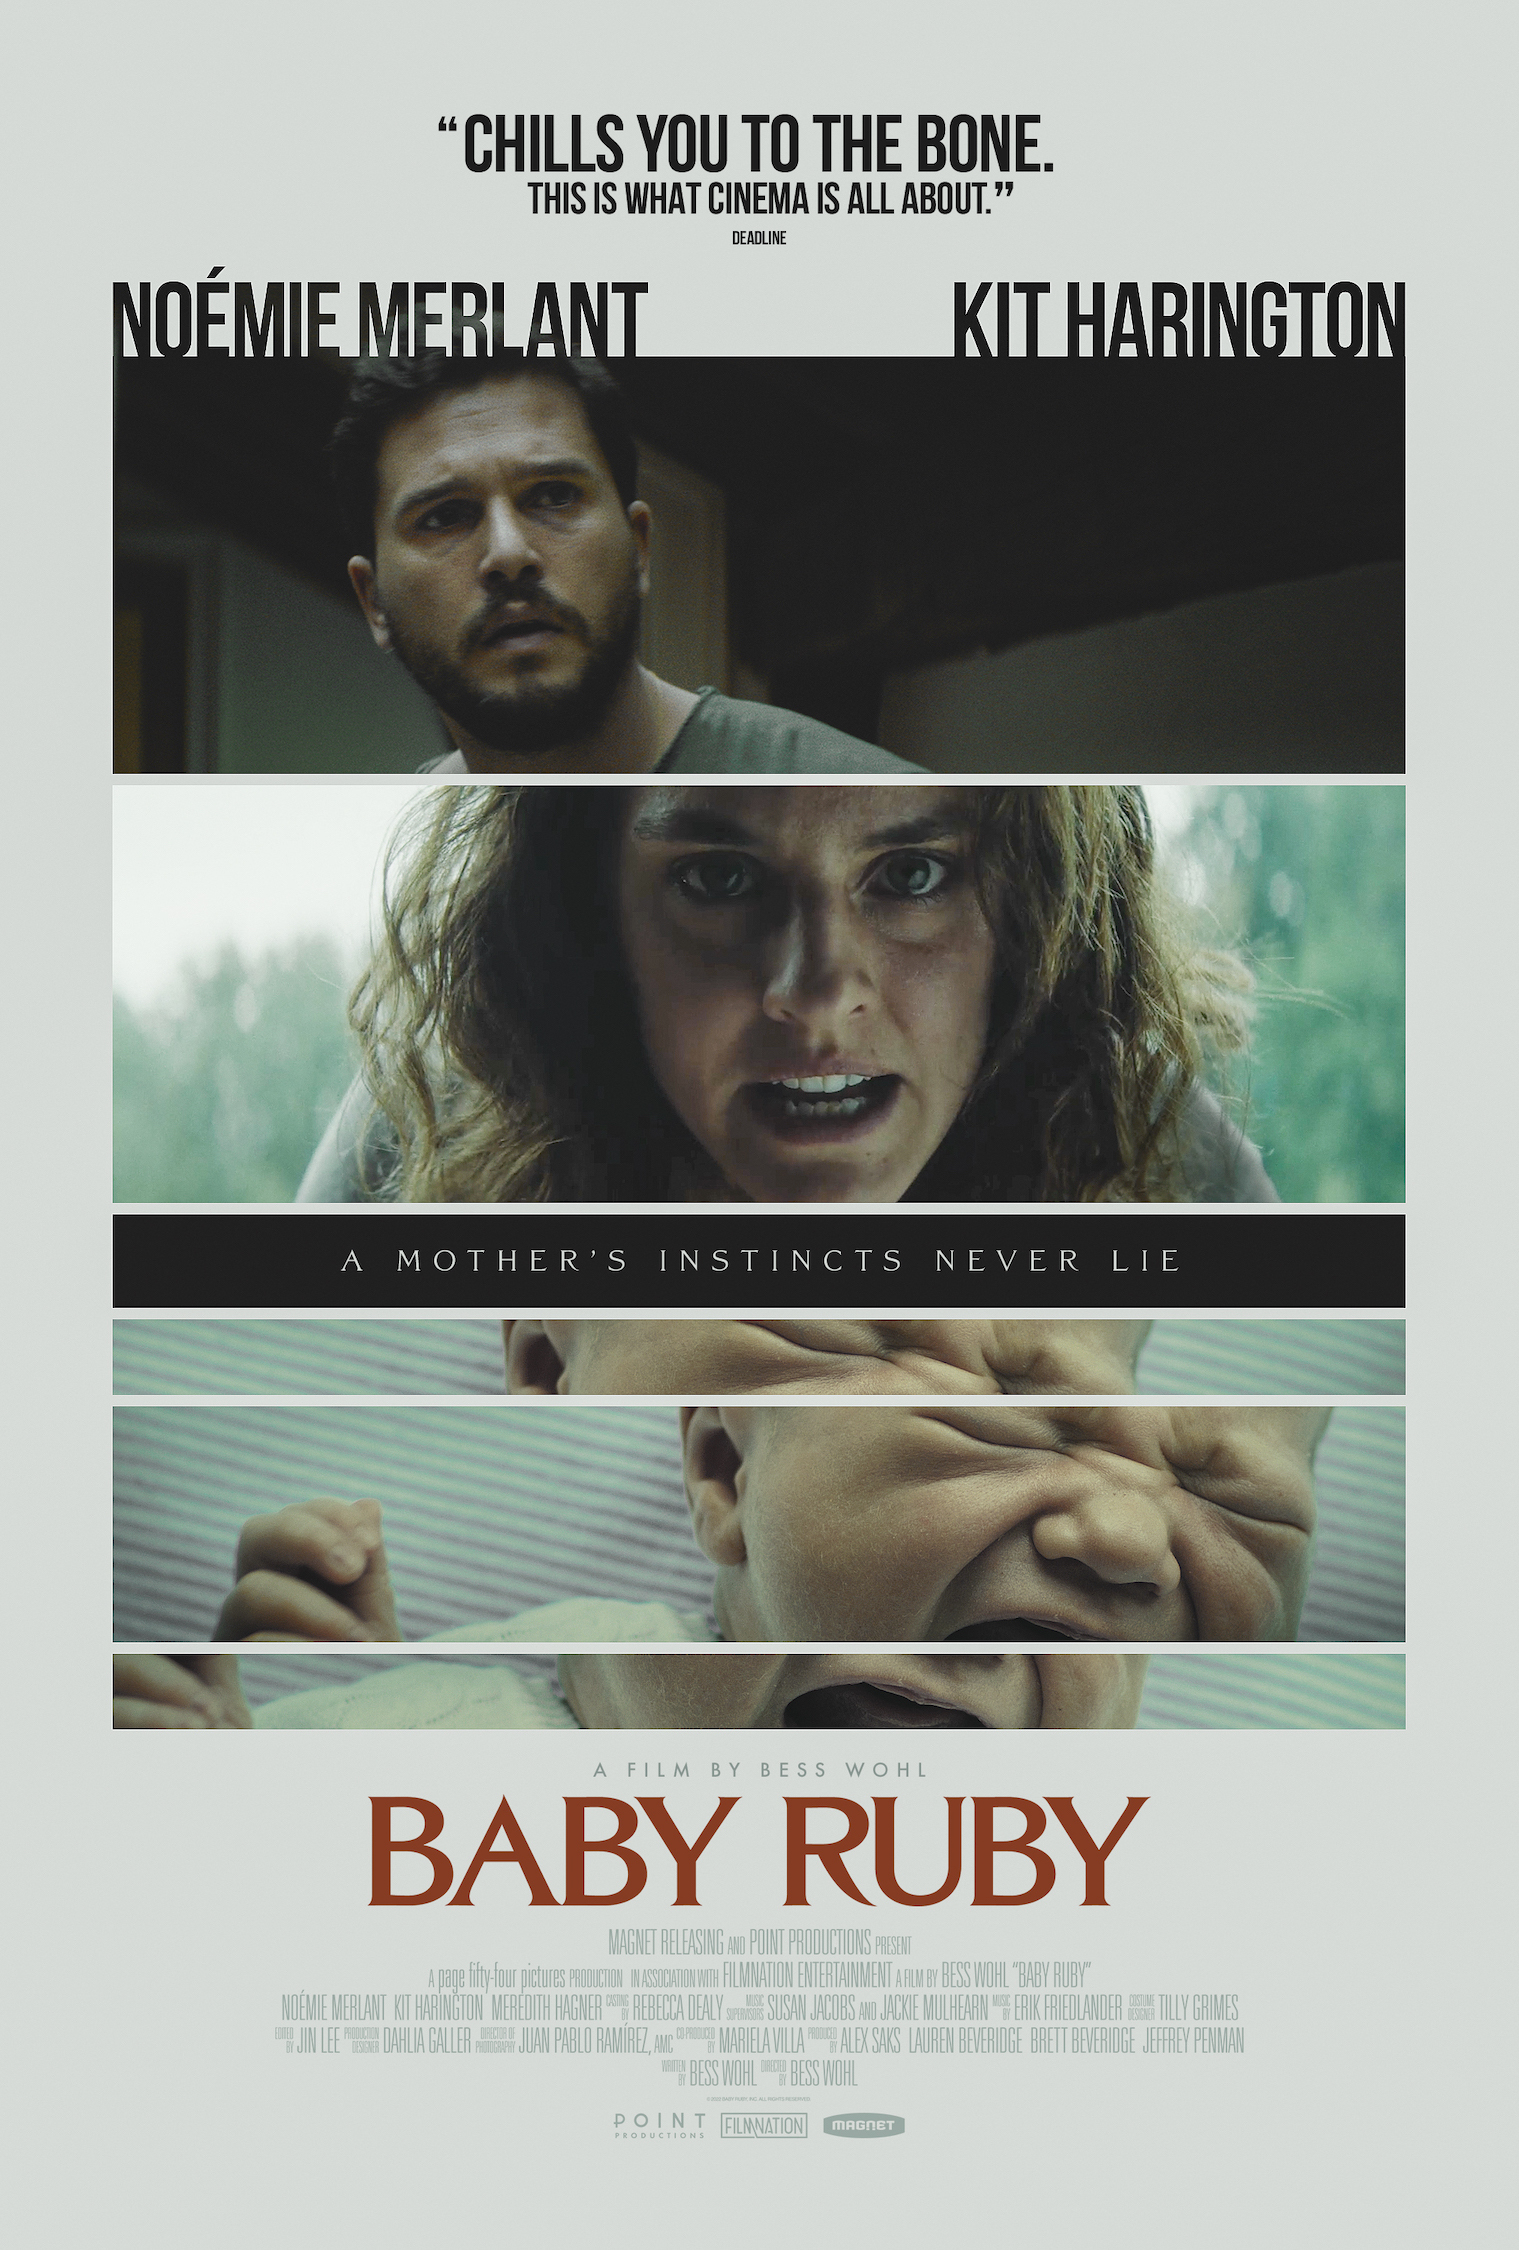 ‘Baby Ruby’ Trailer: Noémie Merlant And Kit Harington Are New Parents Struck By Paranoia